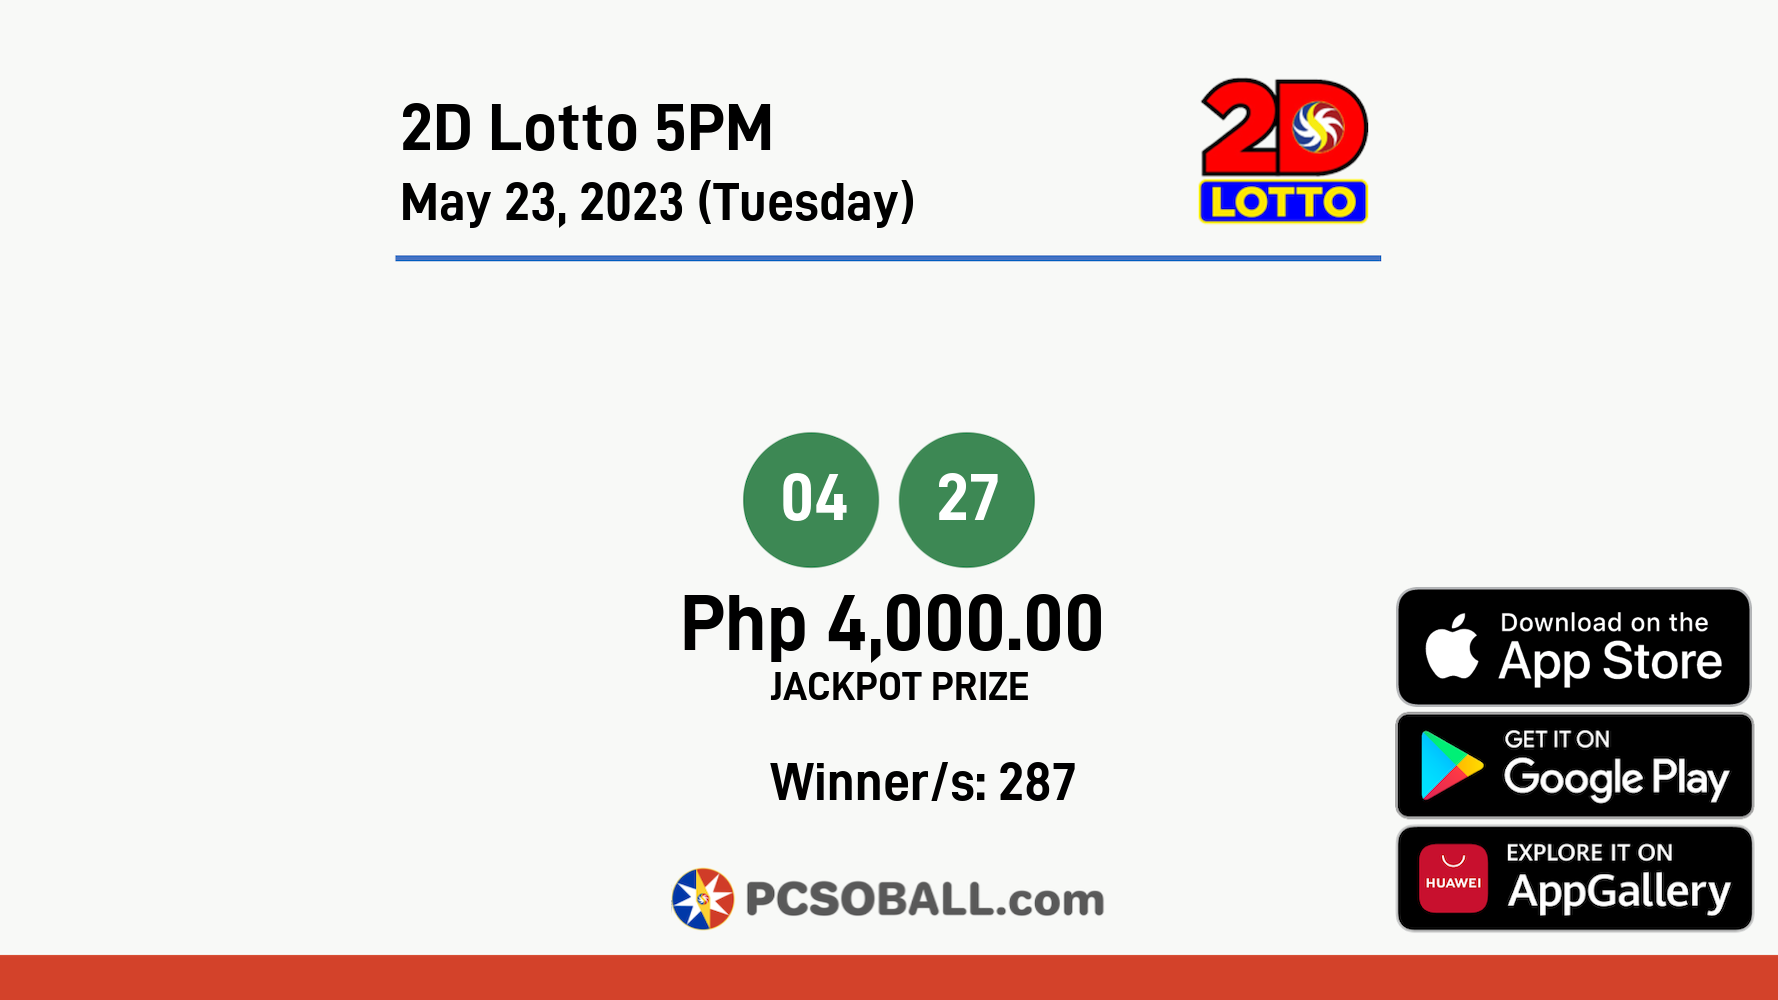 2D Lotto 5PM May 23, 2023 (Tuesday) Result